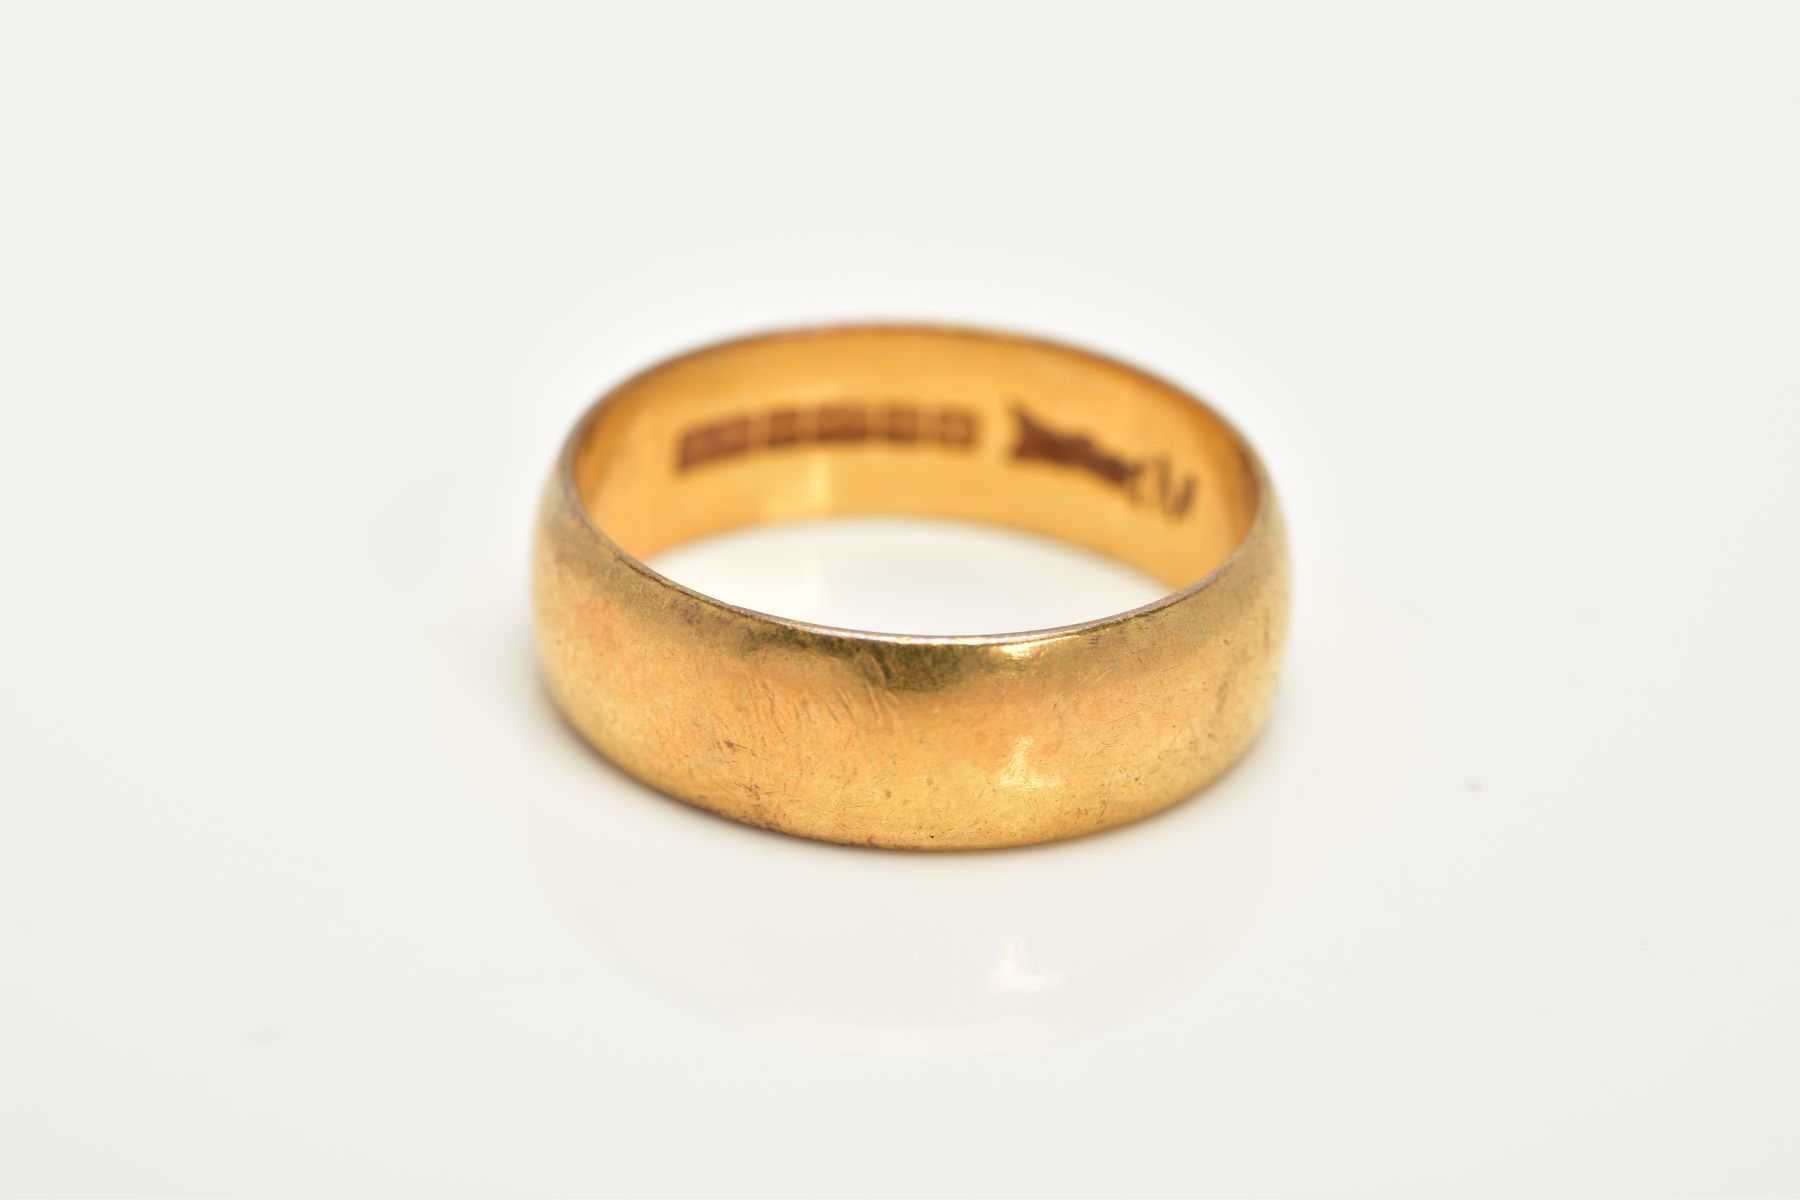 A 22CT GOLD WIDE WEDDING BAND, plain polished design, hallmarked 22ct gold Birmingham, ring size - Image 2 of 2